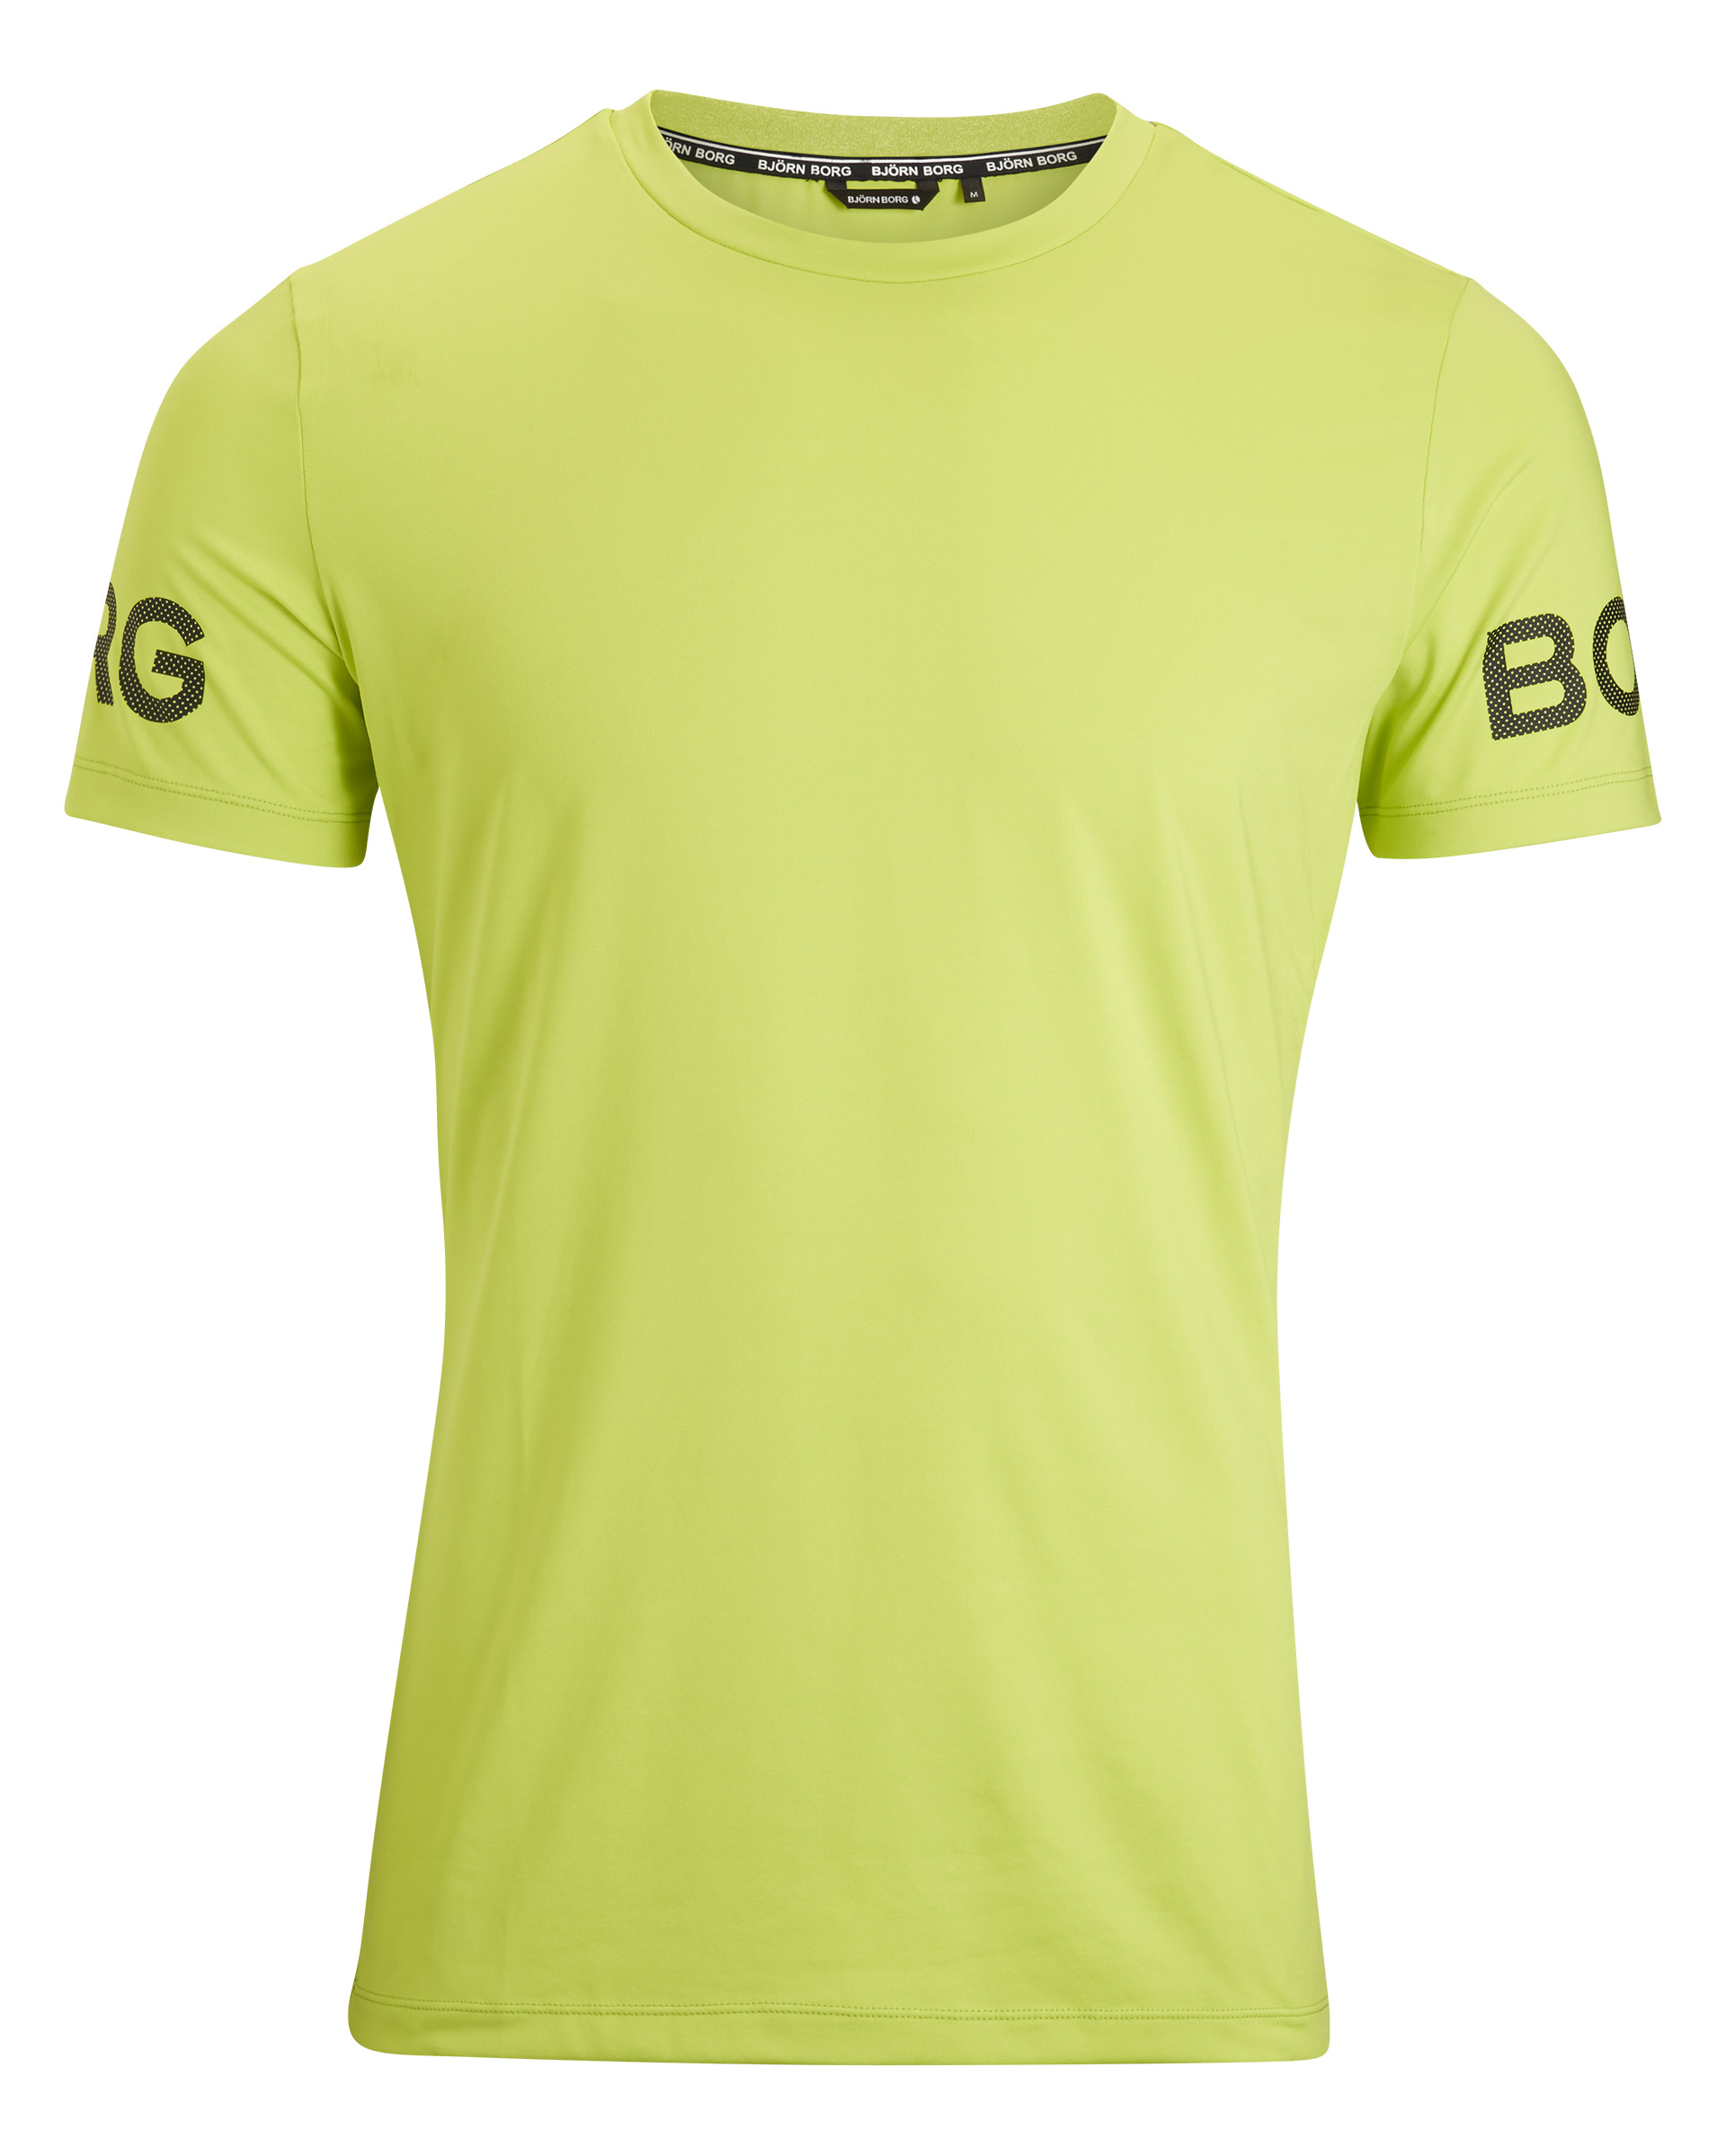 Björn Tee Performance - Lime Punch - Tights.no